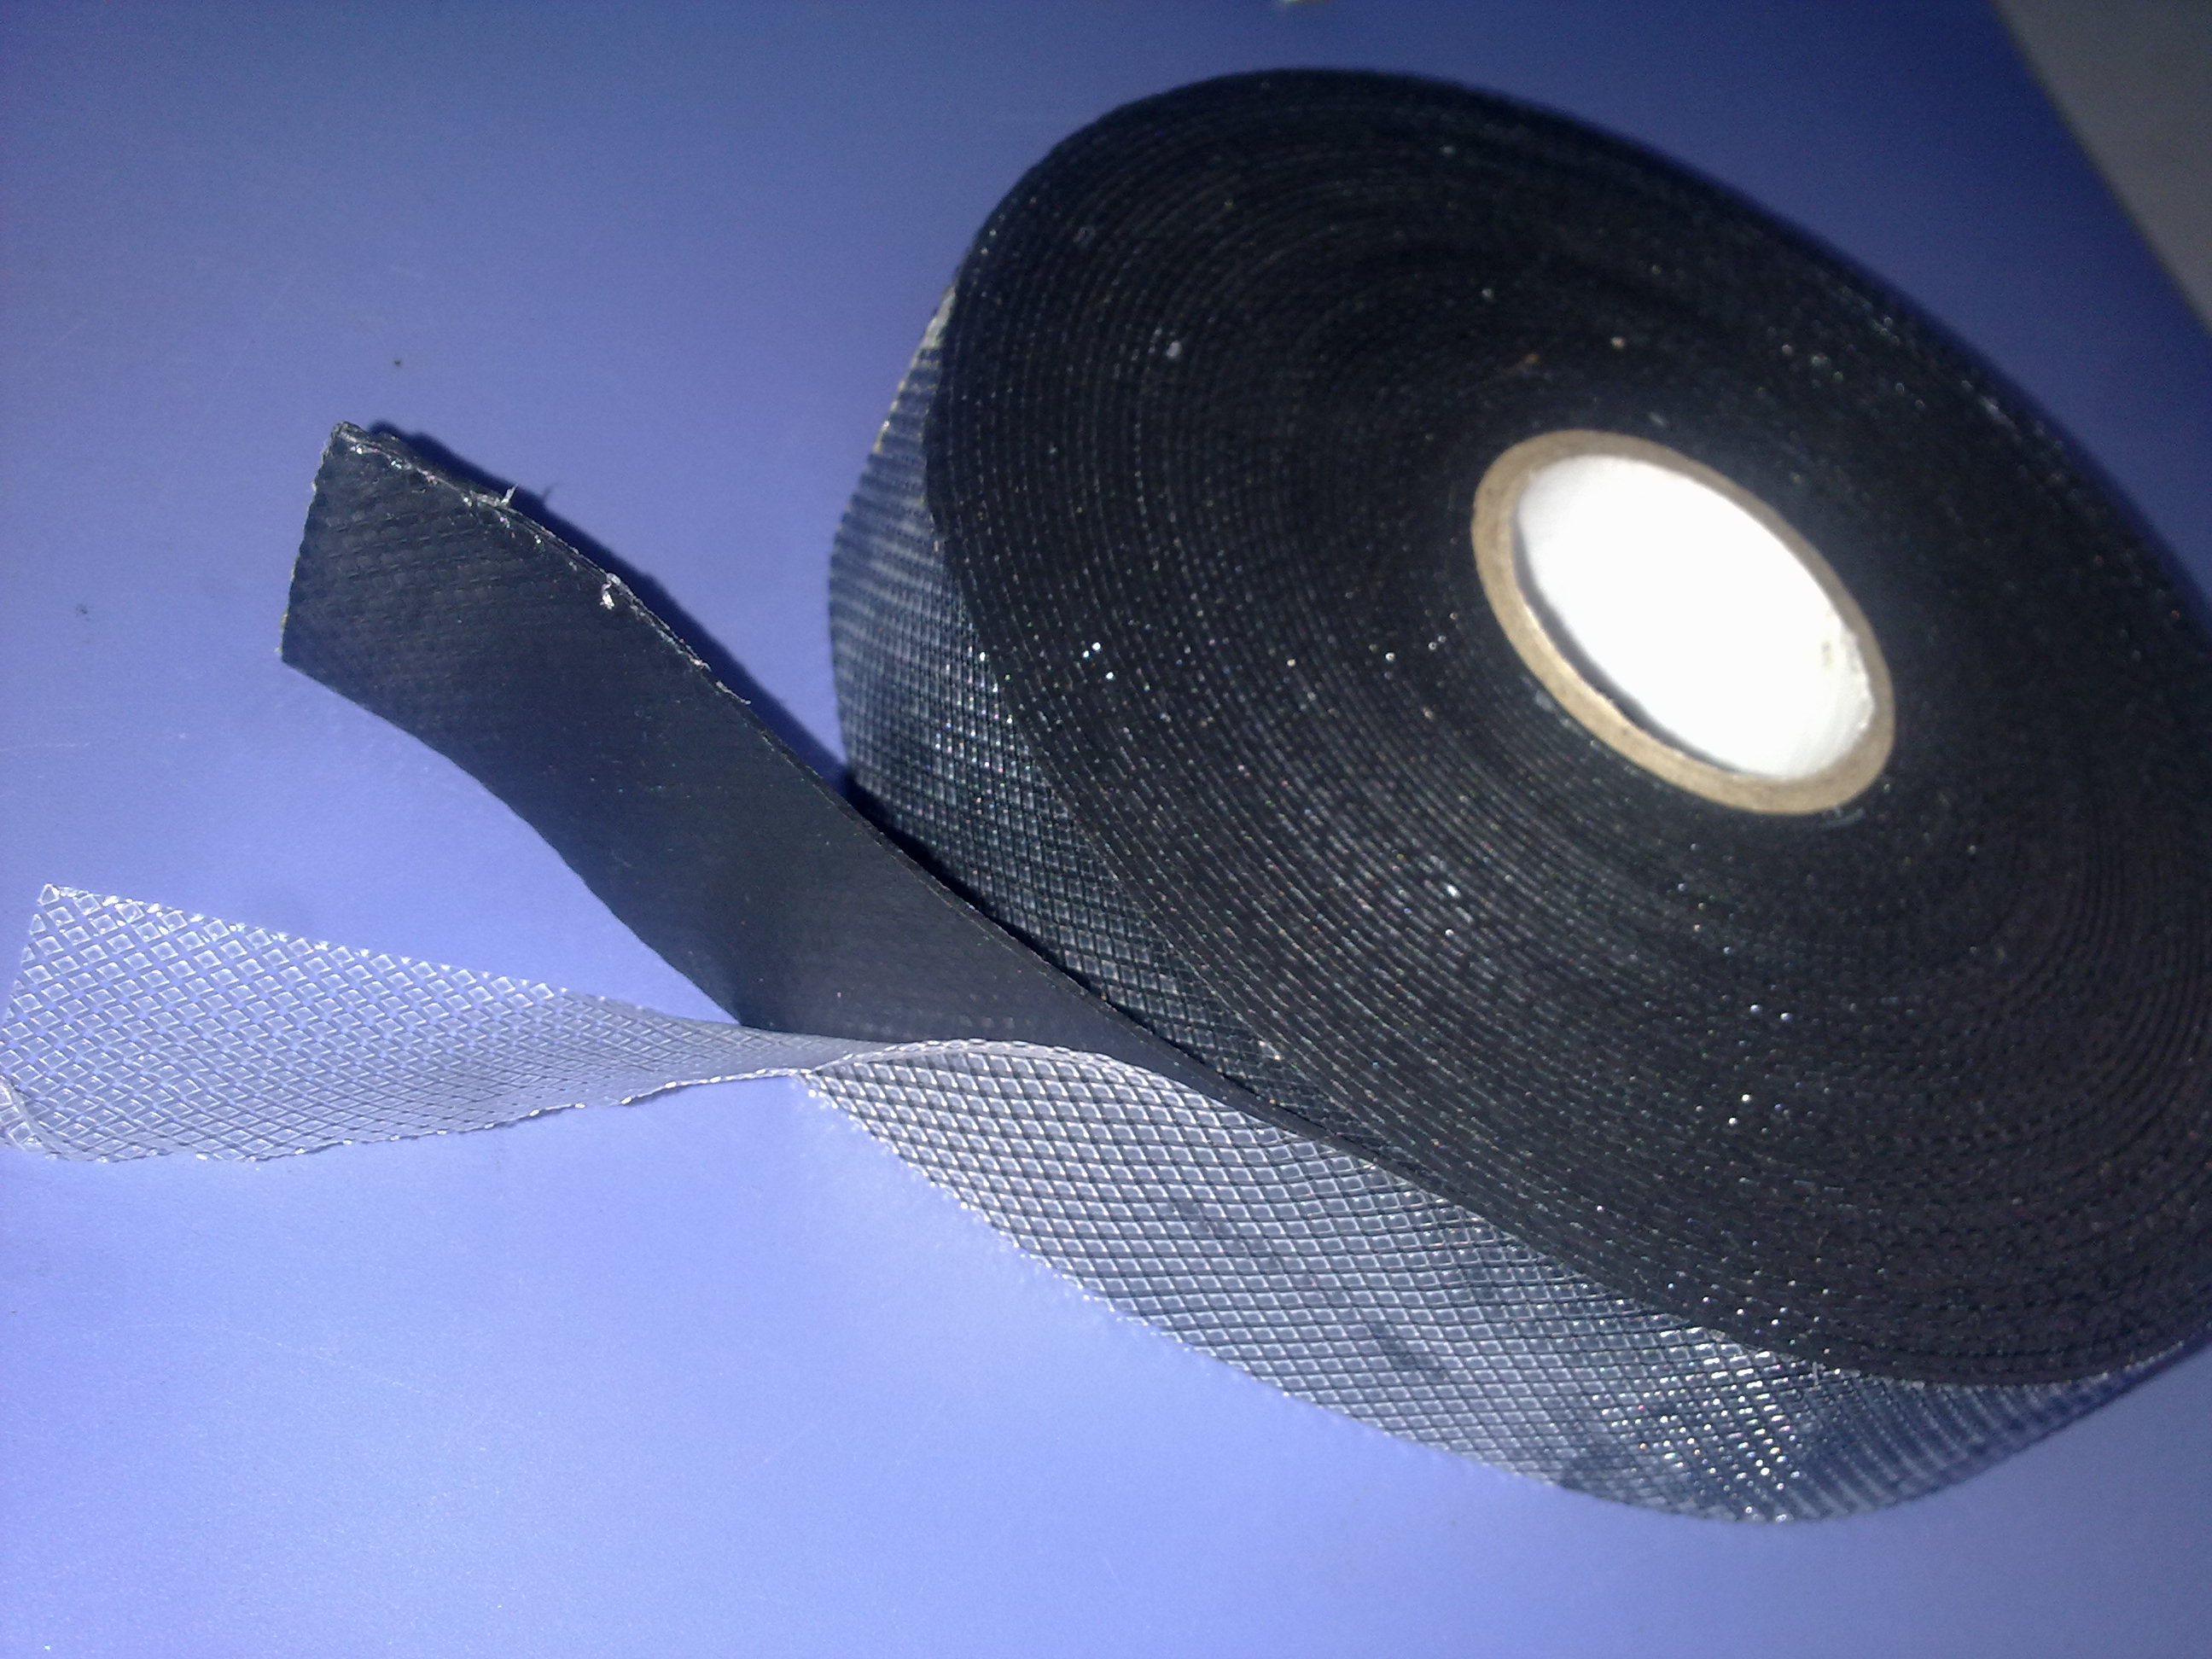 High voltage appliction waterproof self fusing rubber tape